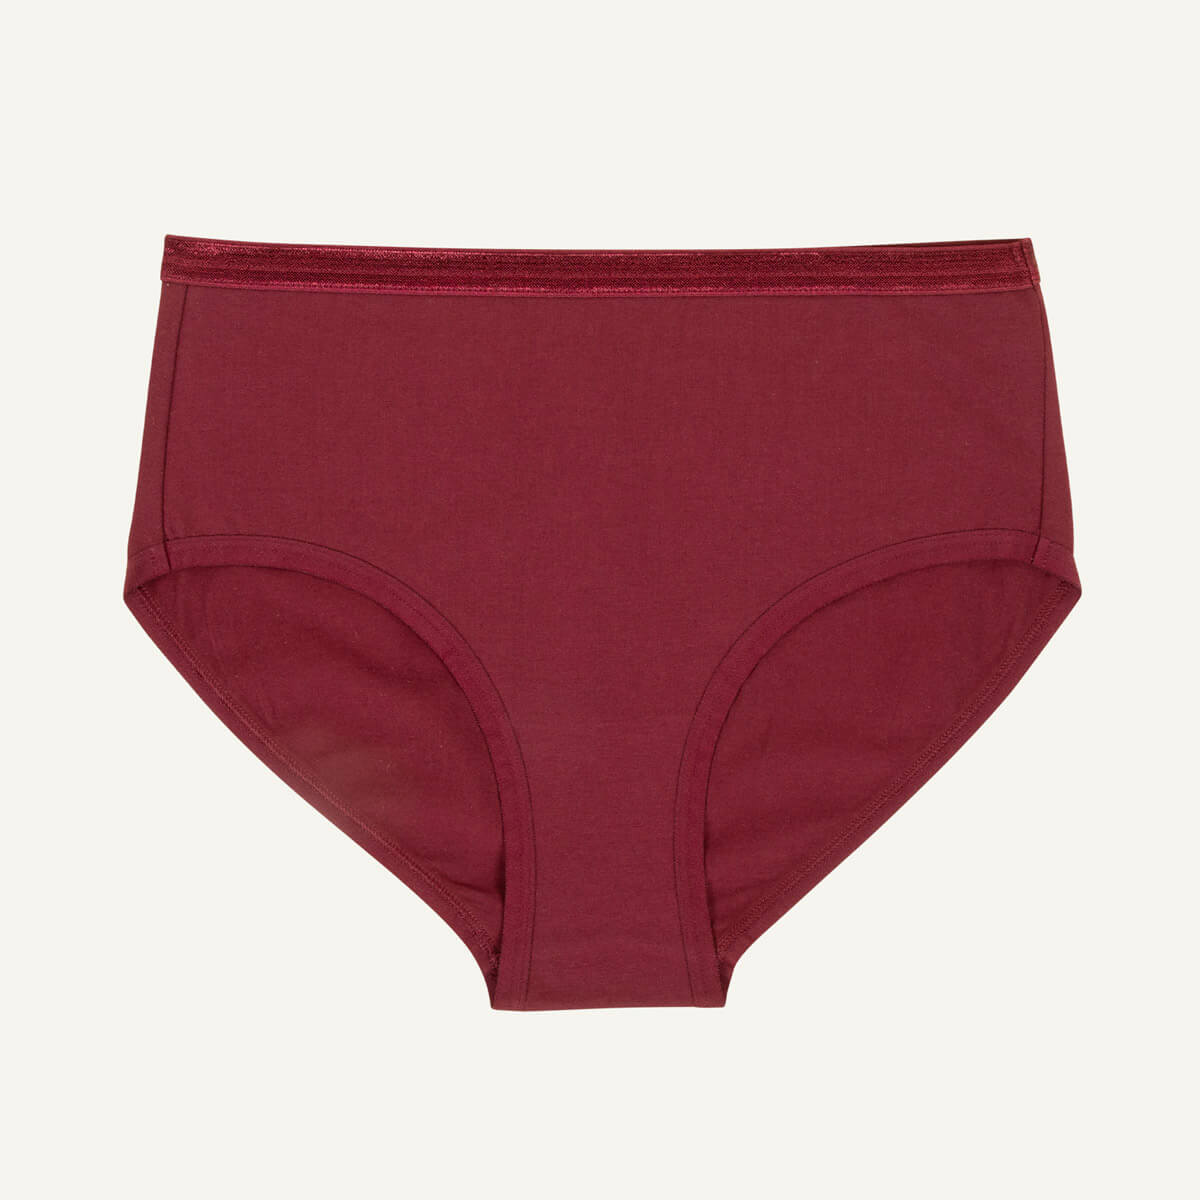 Subset Organic Cotton Women's Mid-Rise Brief: In sizes 2XS-4XL